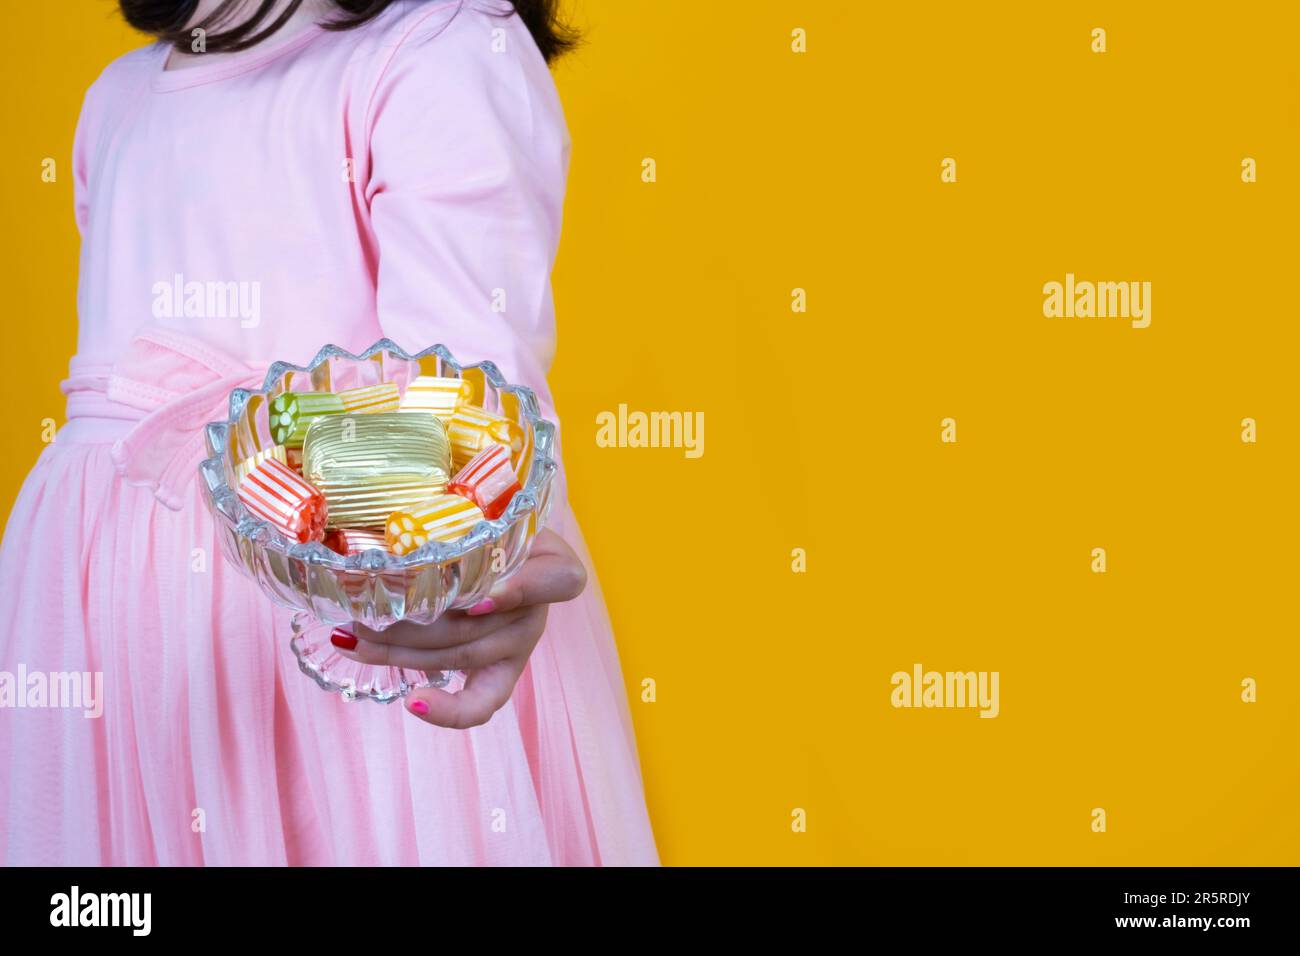 Little girl holding bowl of wrapped luxury chocolate. Standing over isolated yellow background, copy space. Traditional religious holiday sugar feast Stock Photo